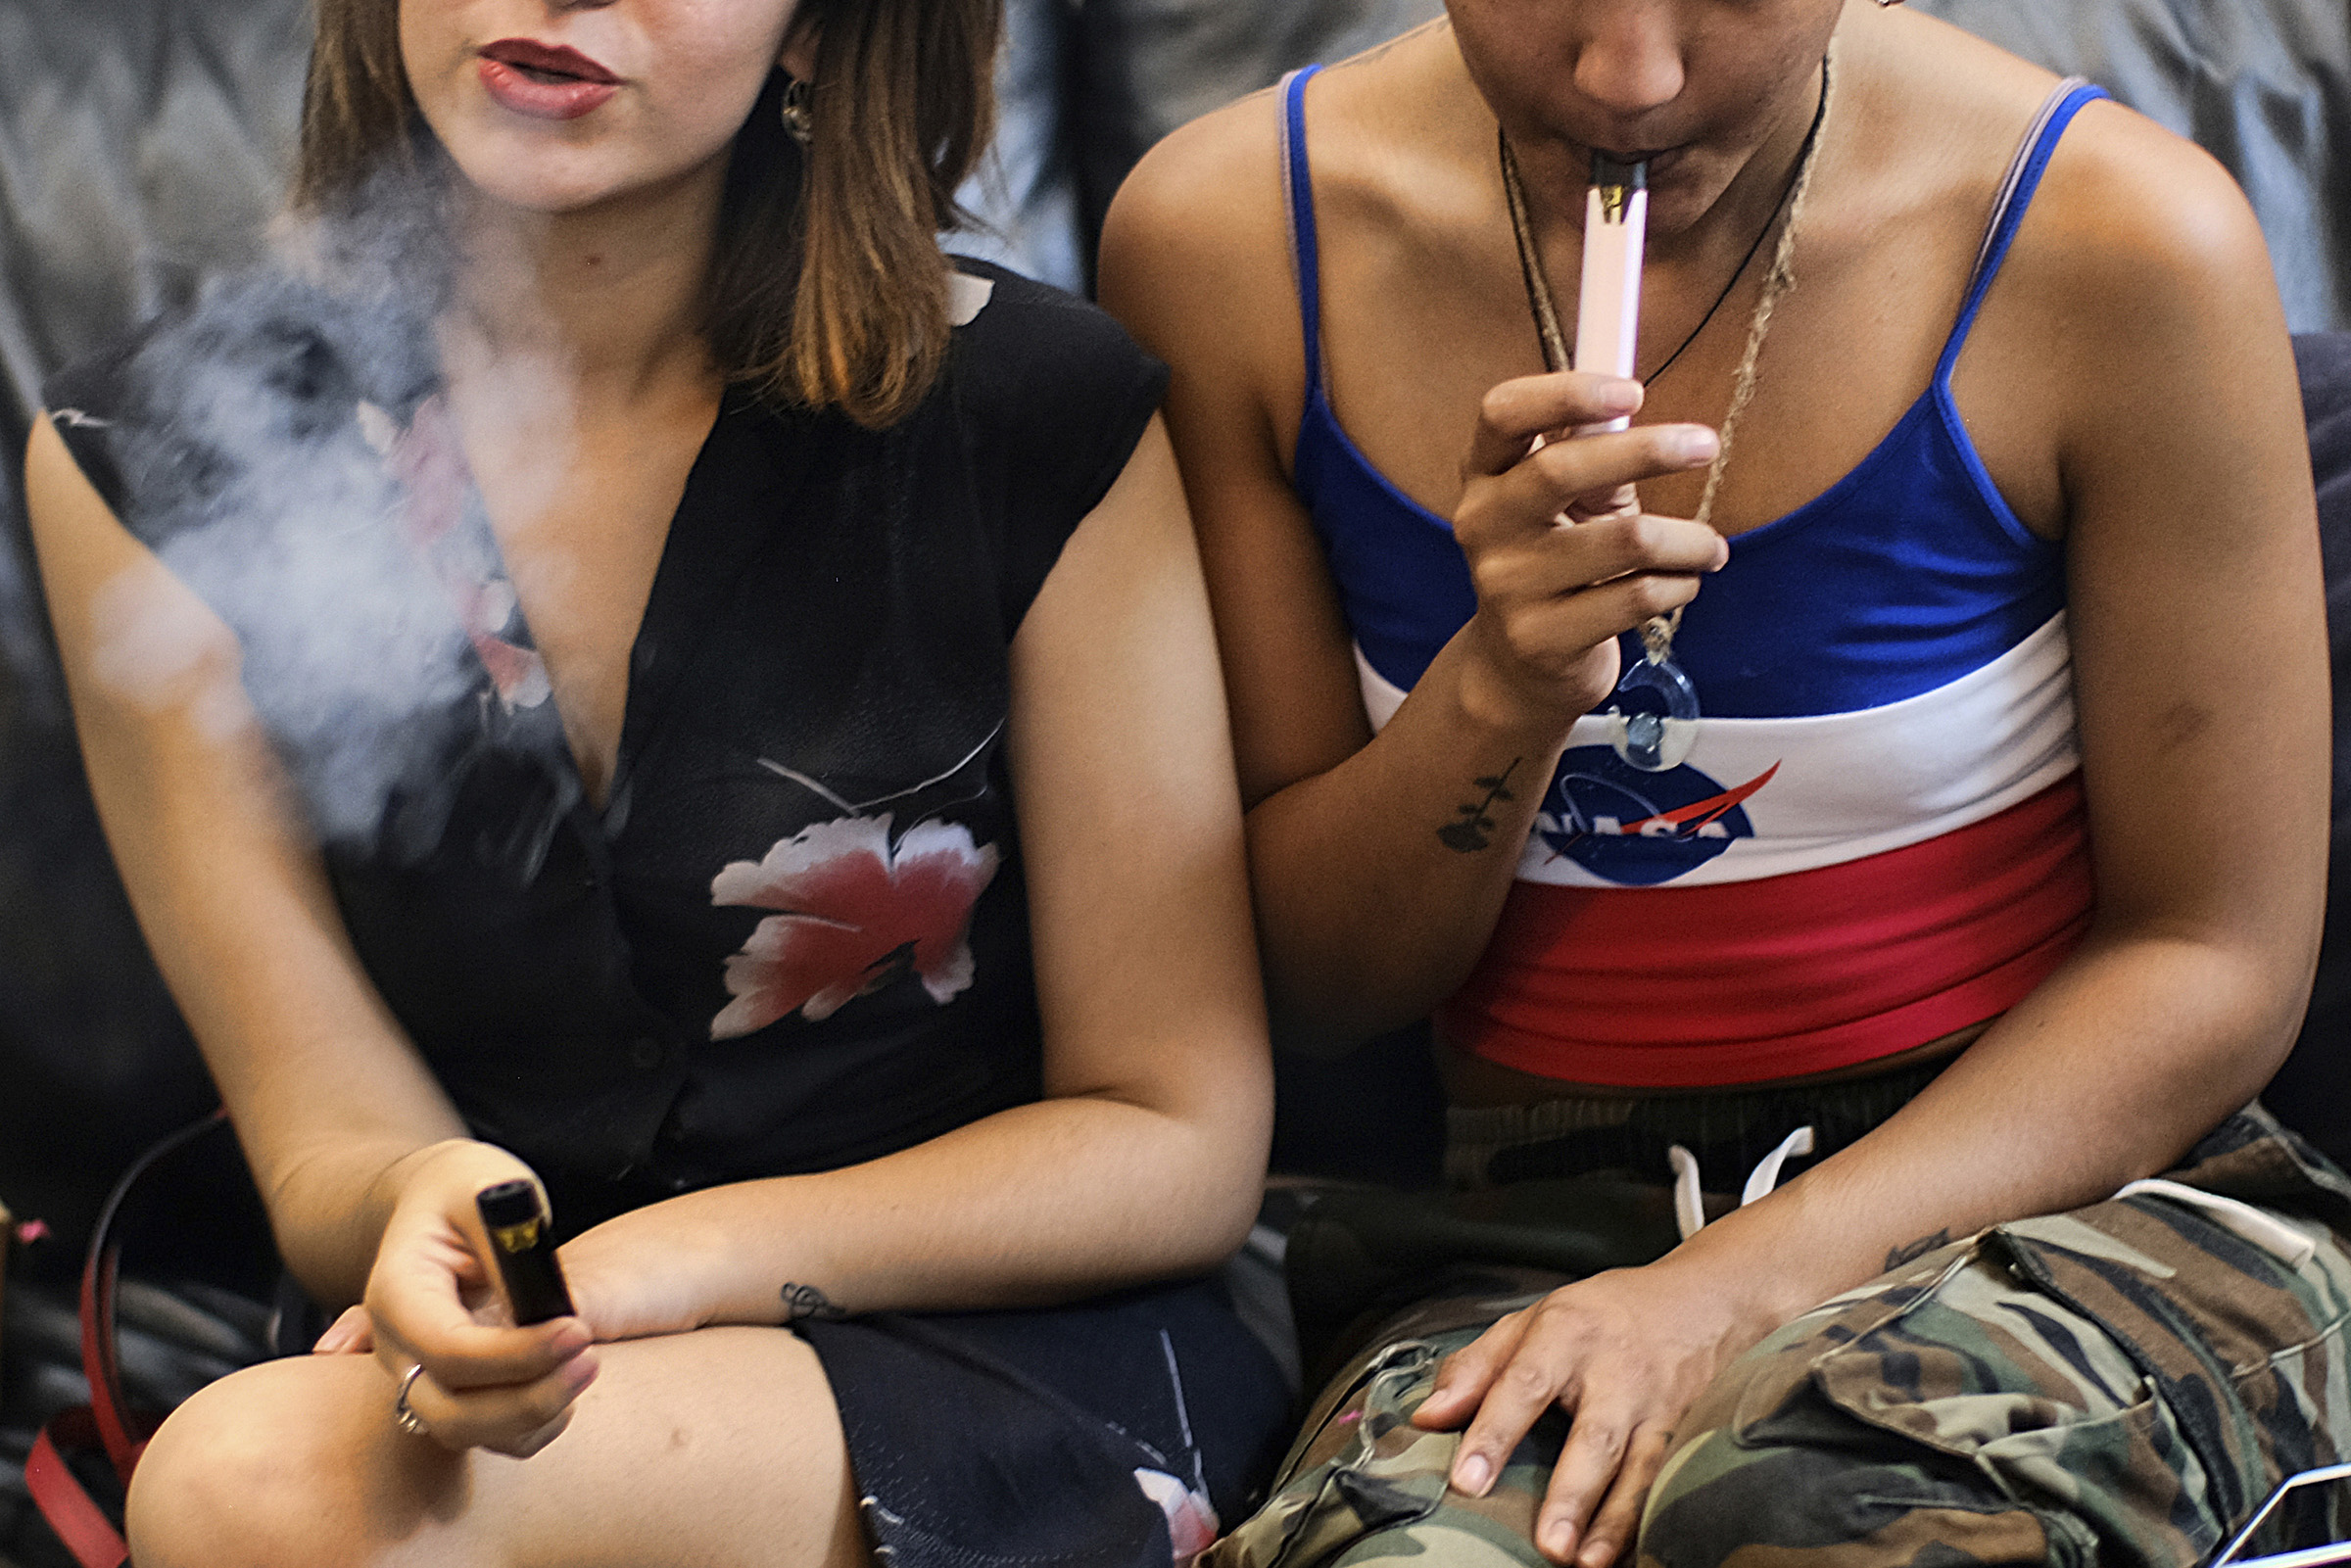 Two women smoke cannabis vape pens at a party in Los Angeles on June 8, 2019. (Richard Vogel—AP)